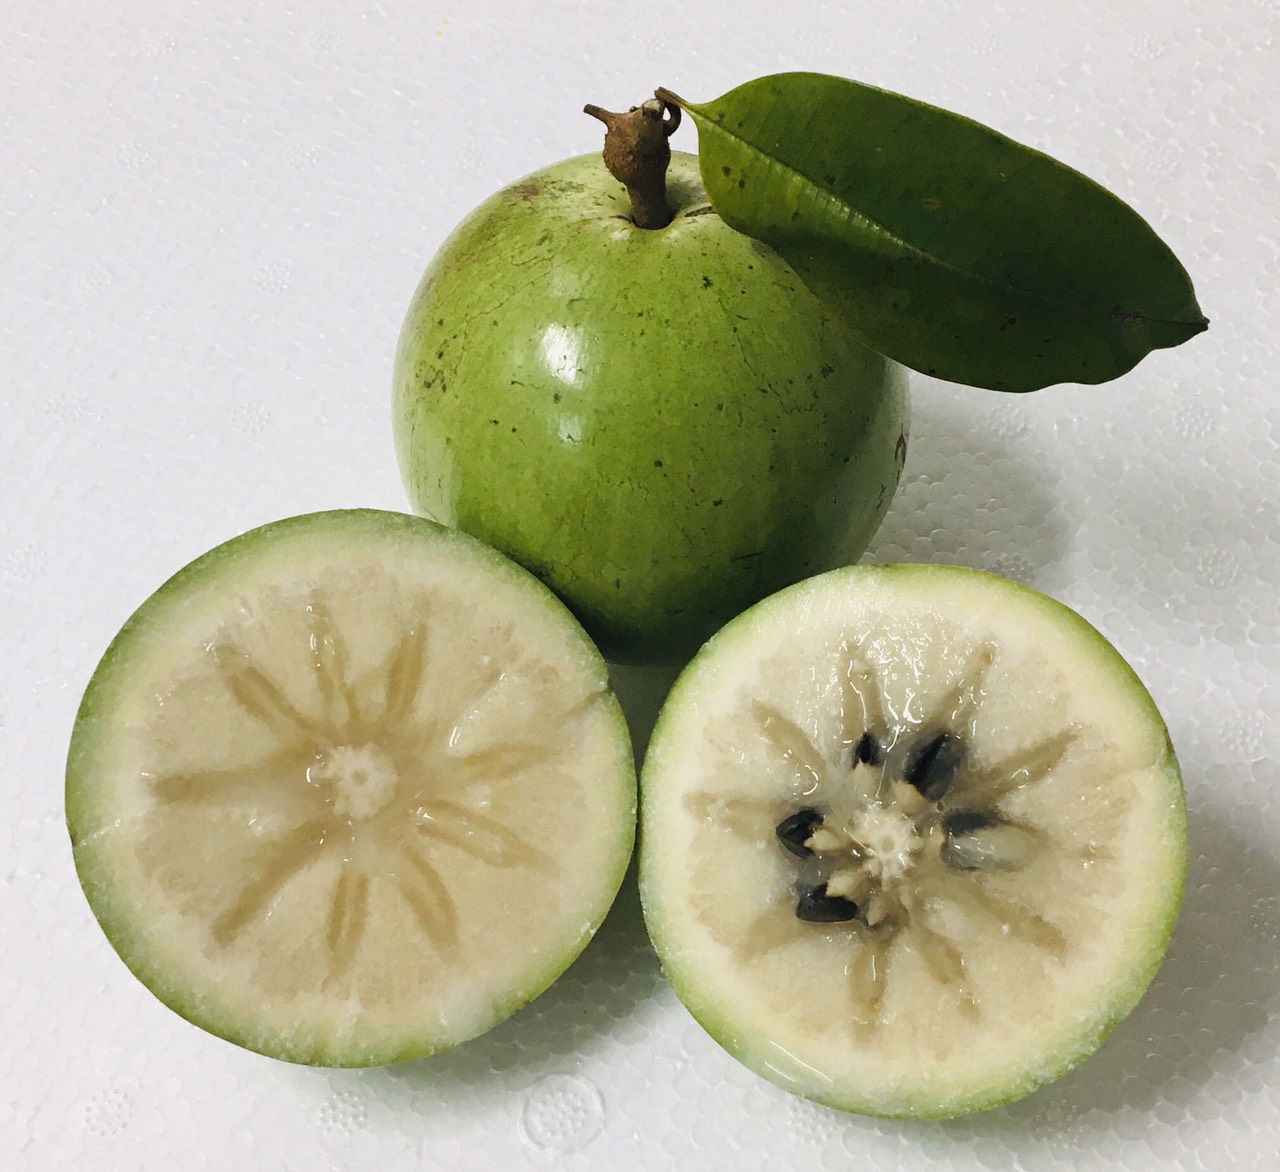 Top Selling Good Grade White Star Apple With 10 Days Shelf Life From West Of Vietnam